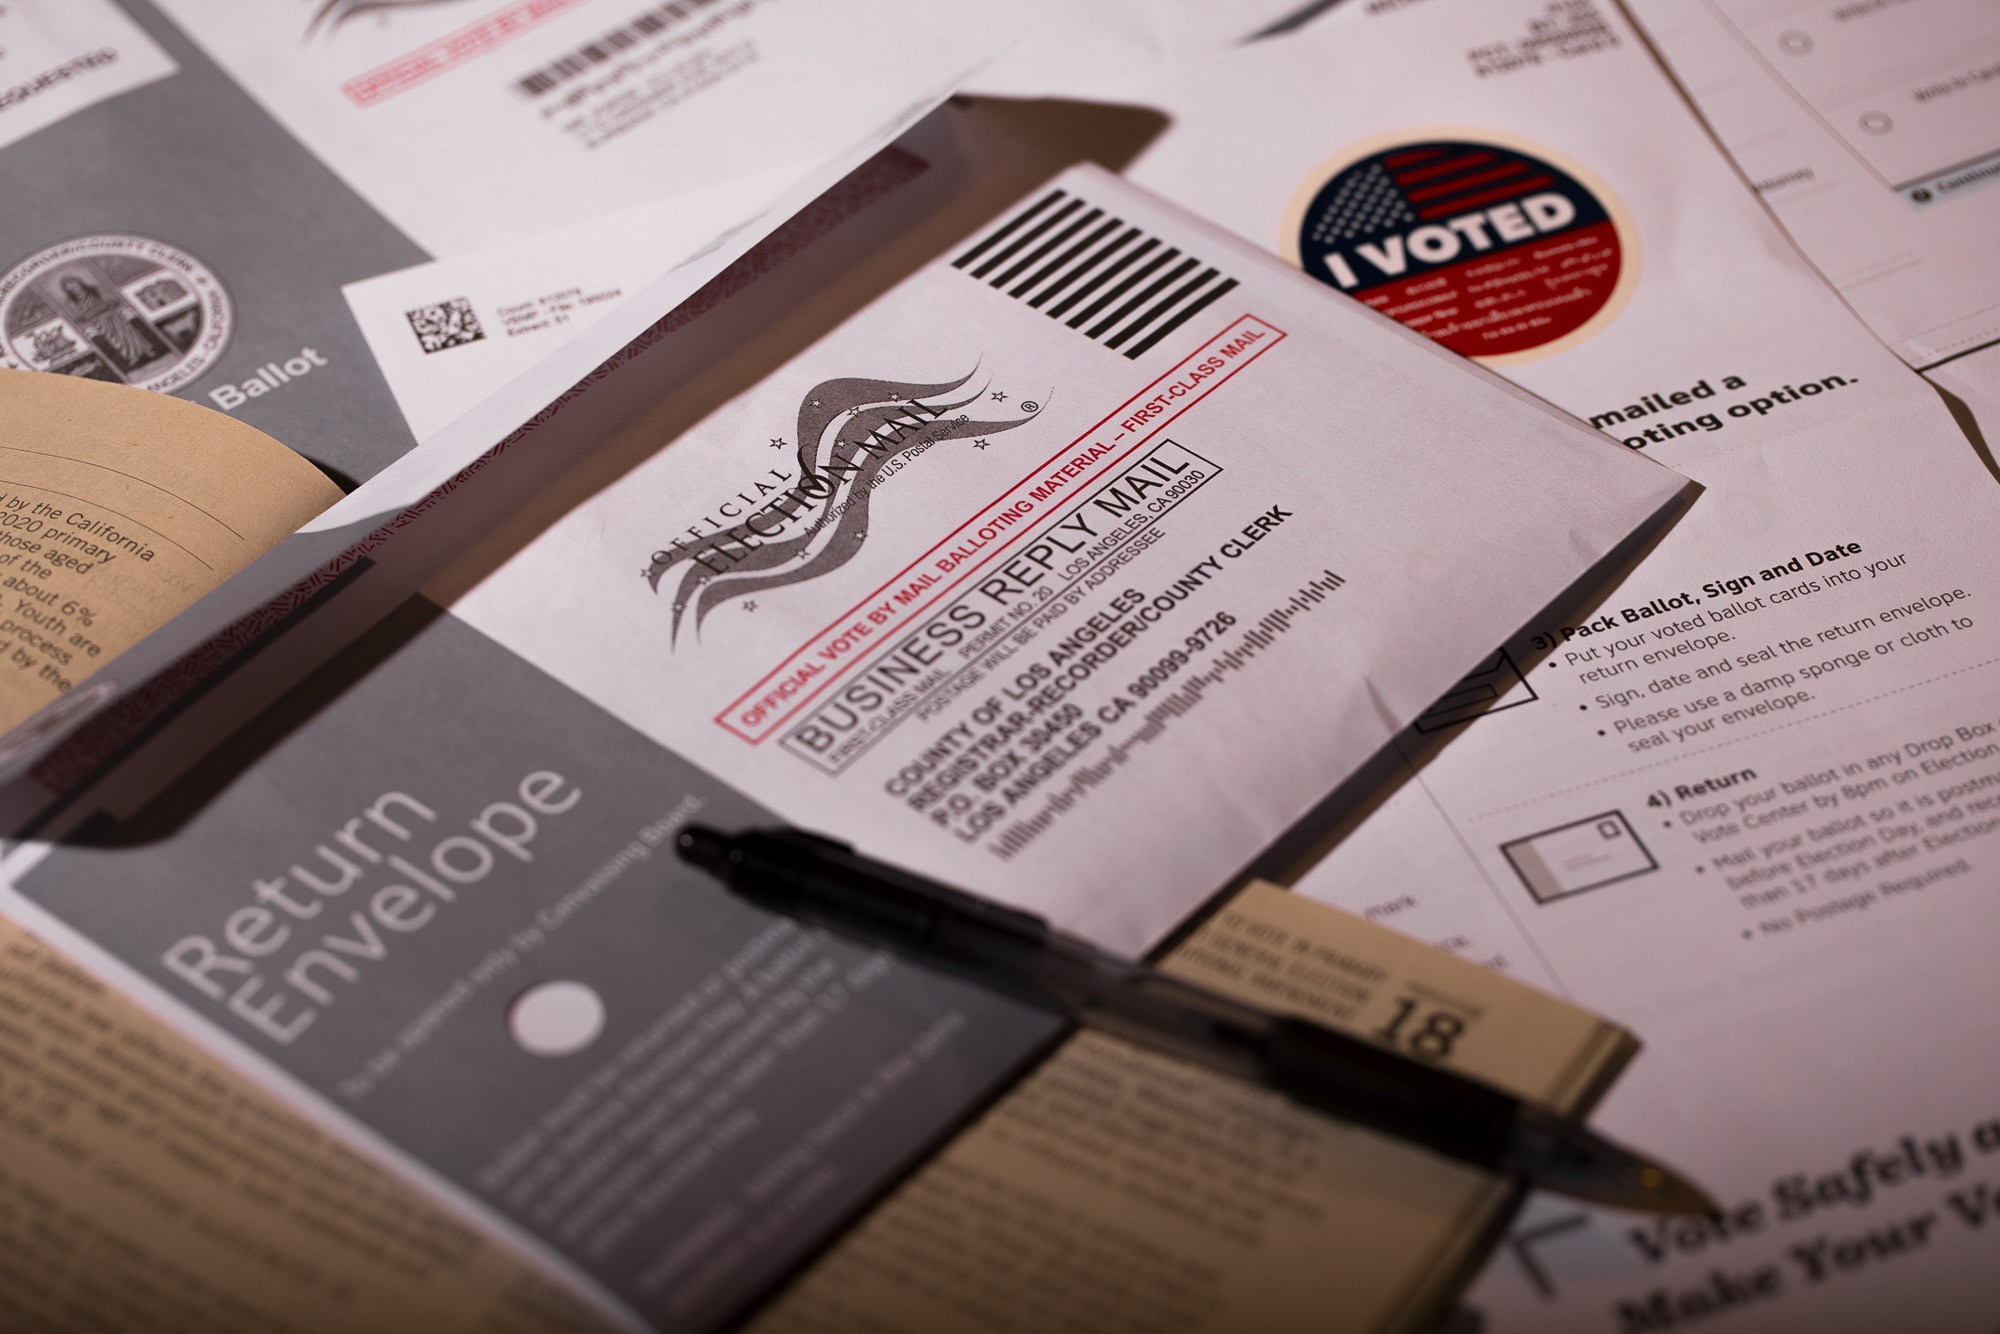 A collection of voting materials including a 